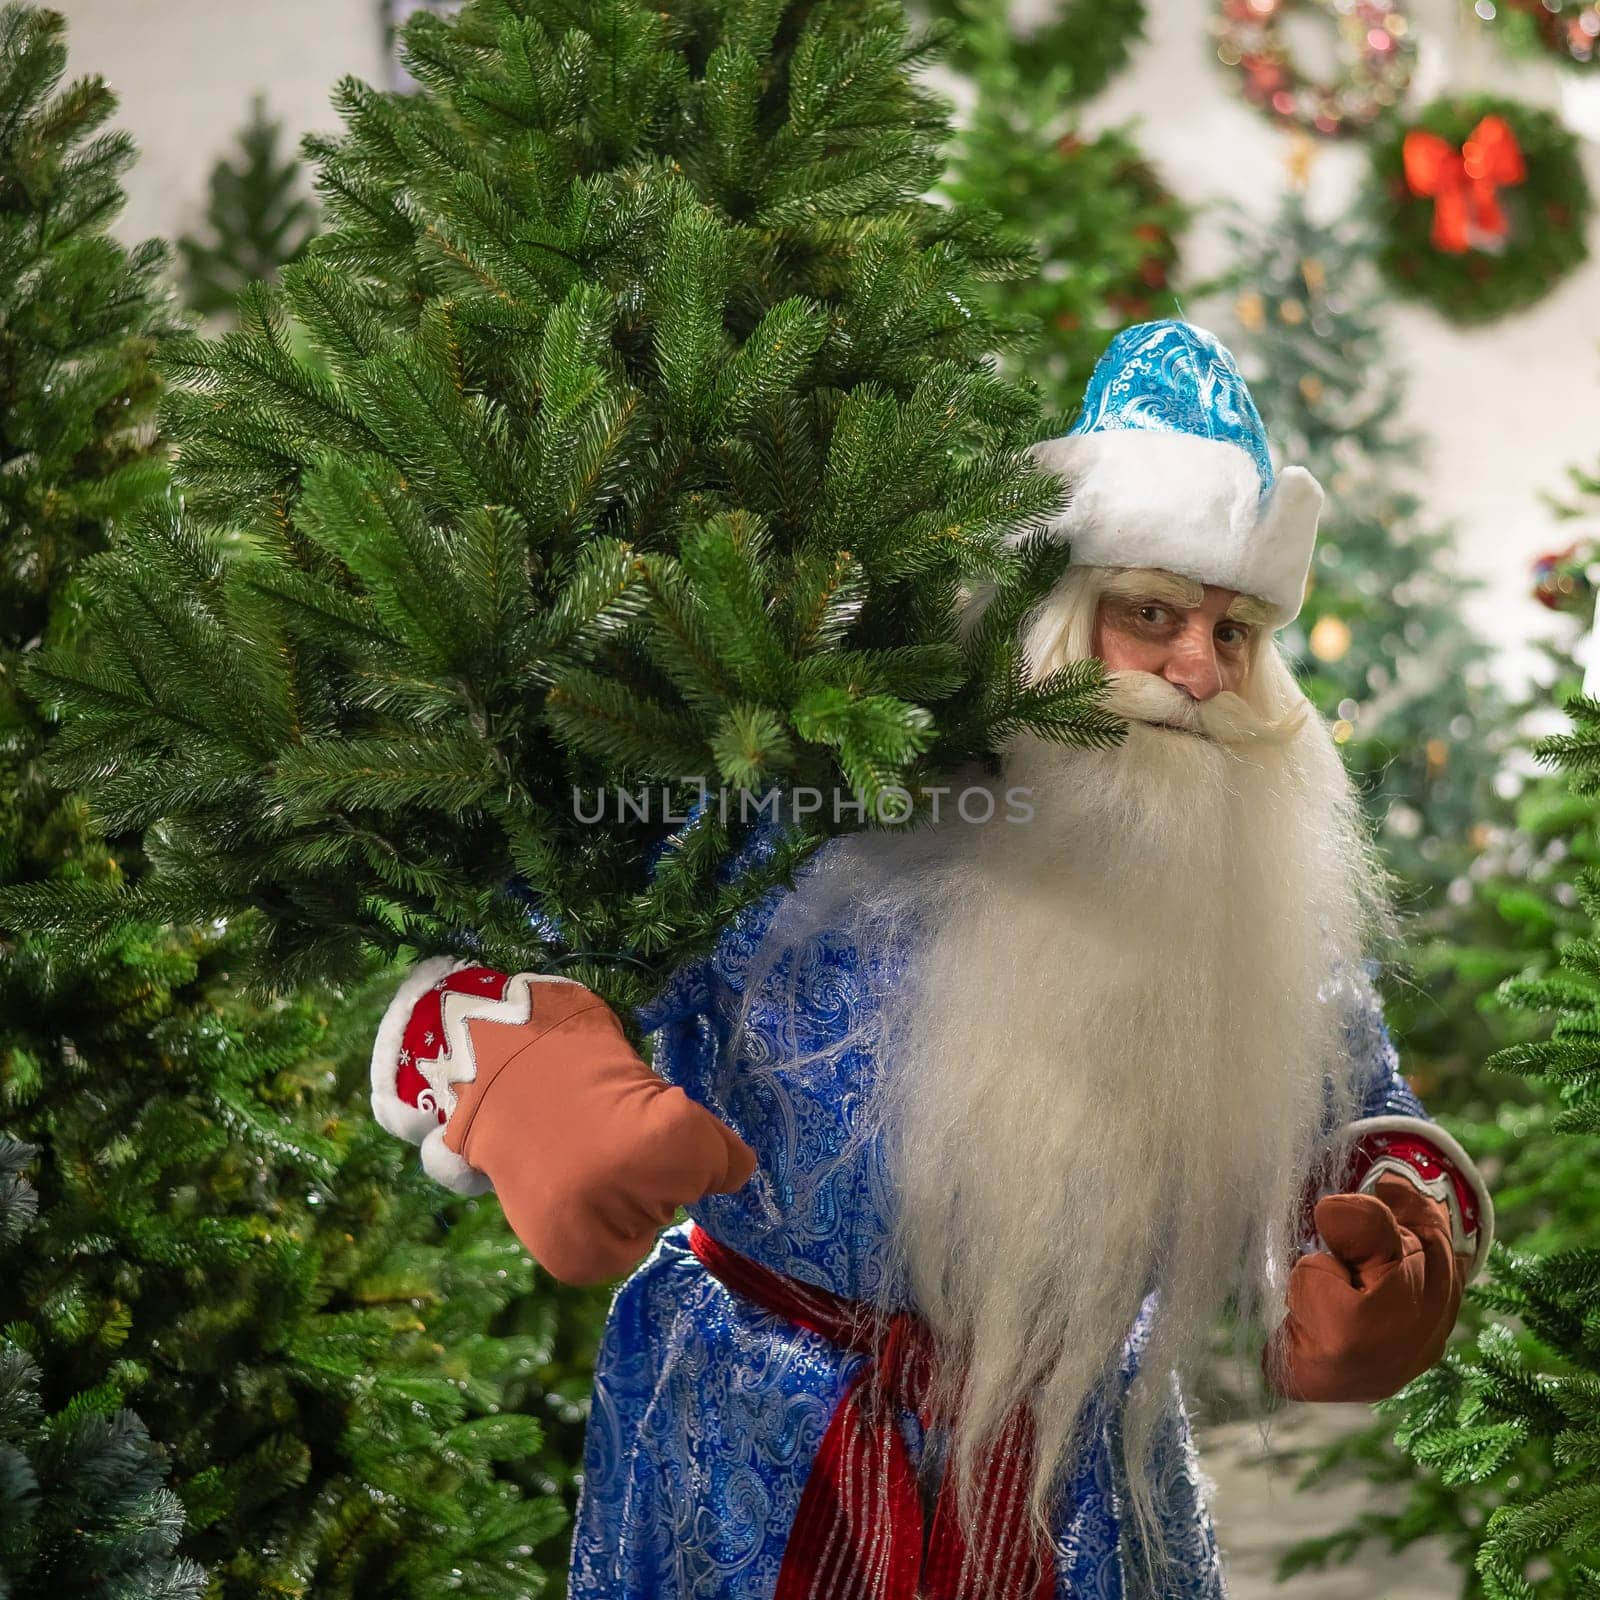 Russian santa claus buys a christmas tree in the store. by mrwed54